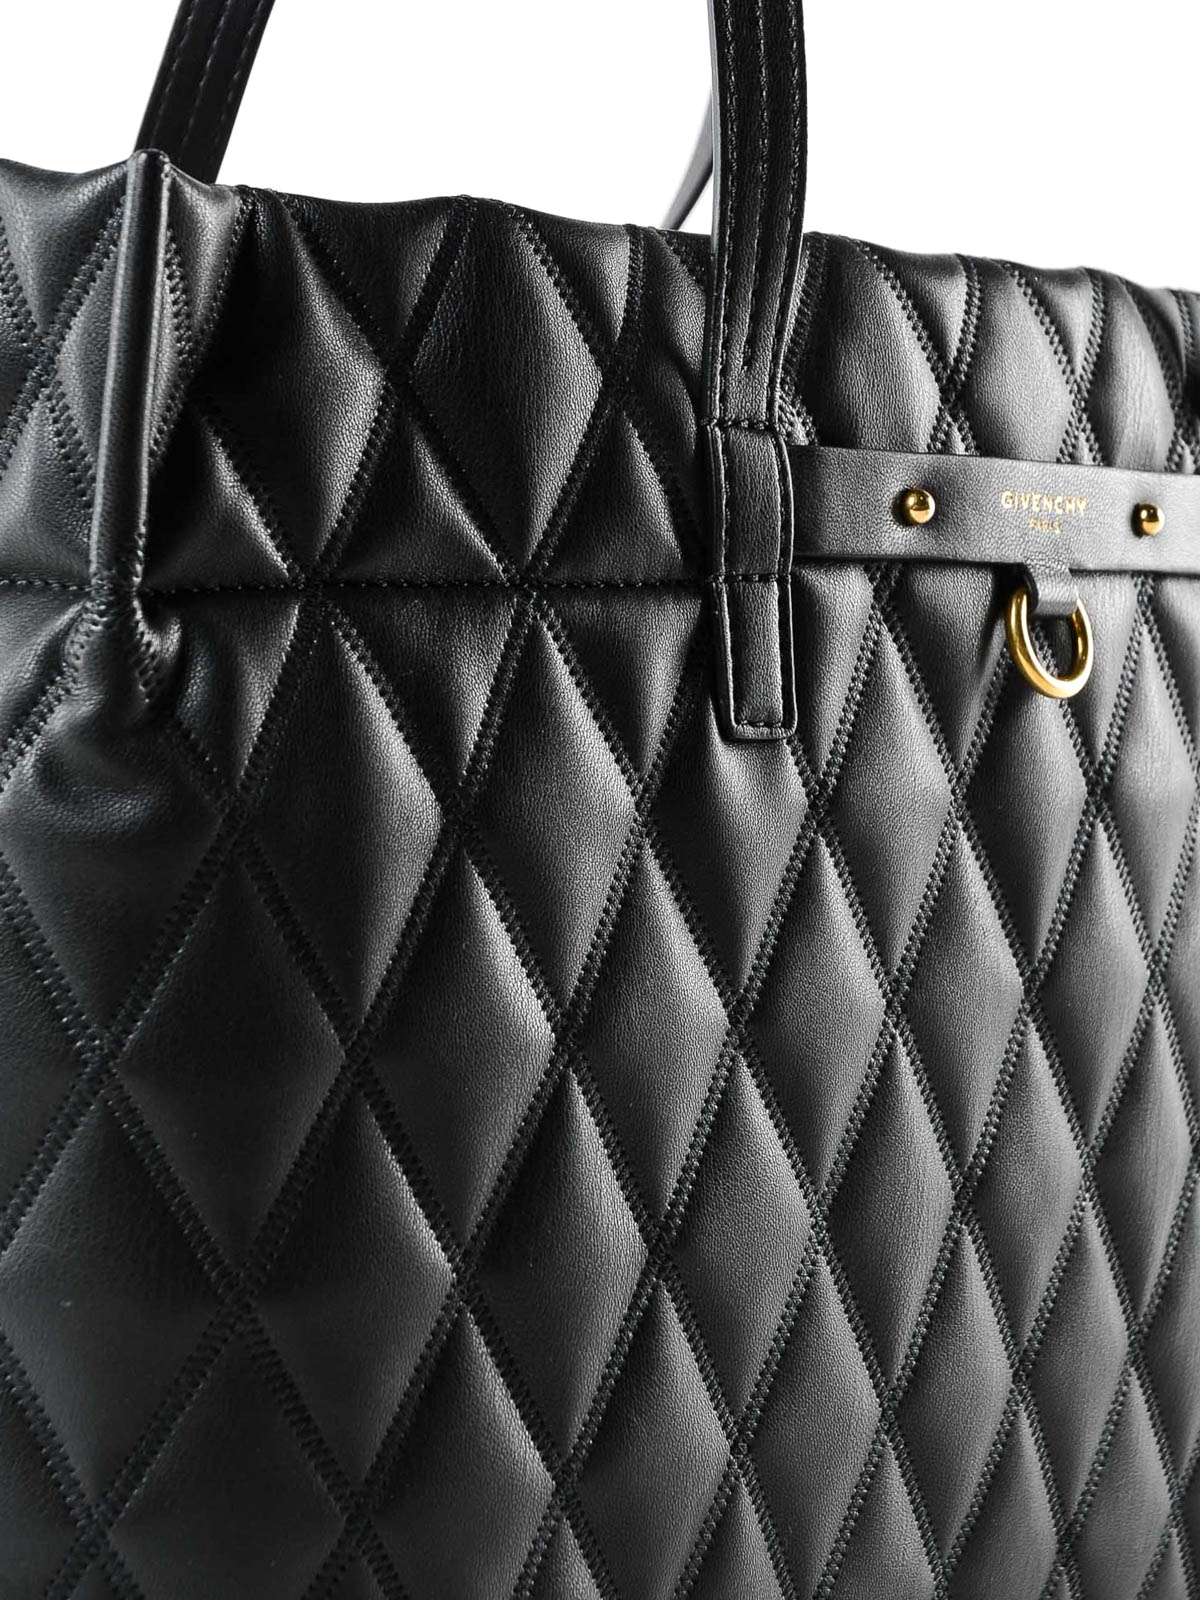 givenchy duo tote